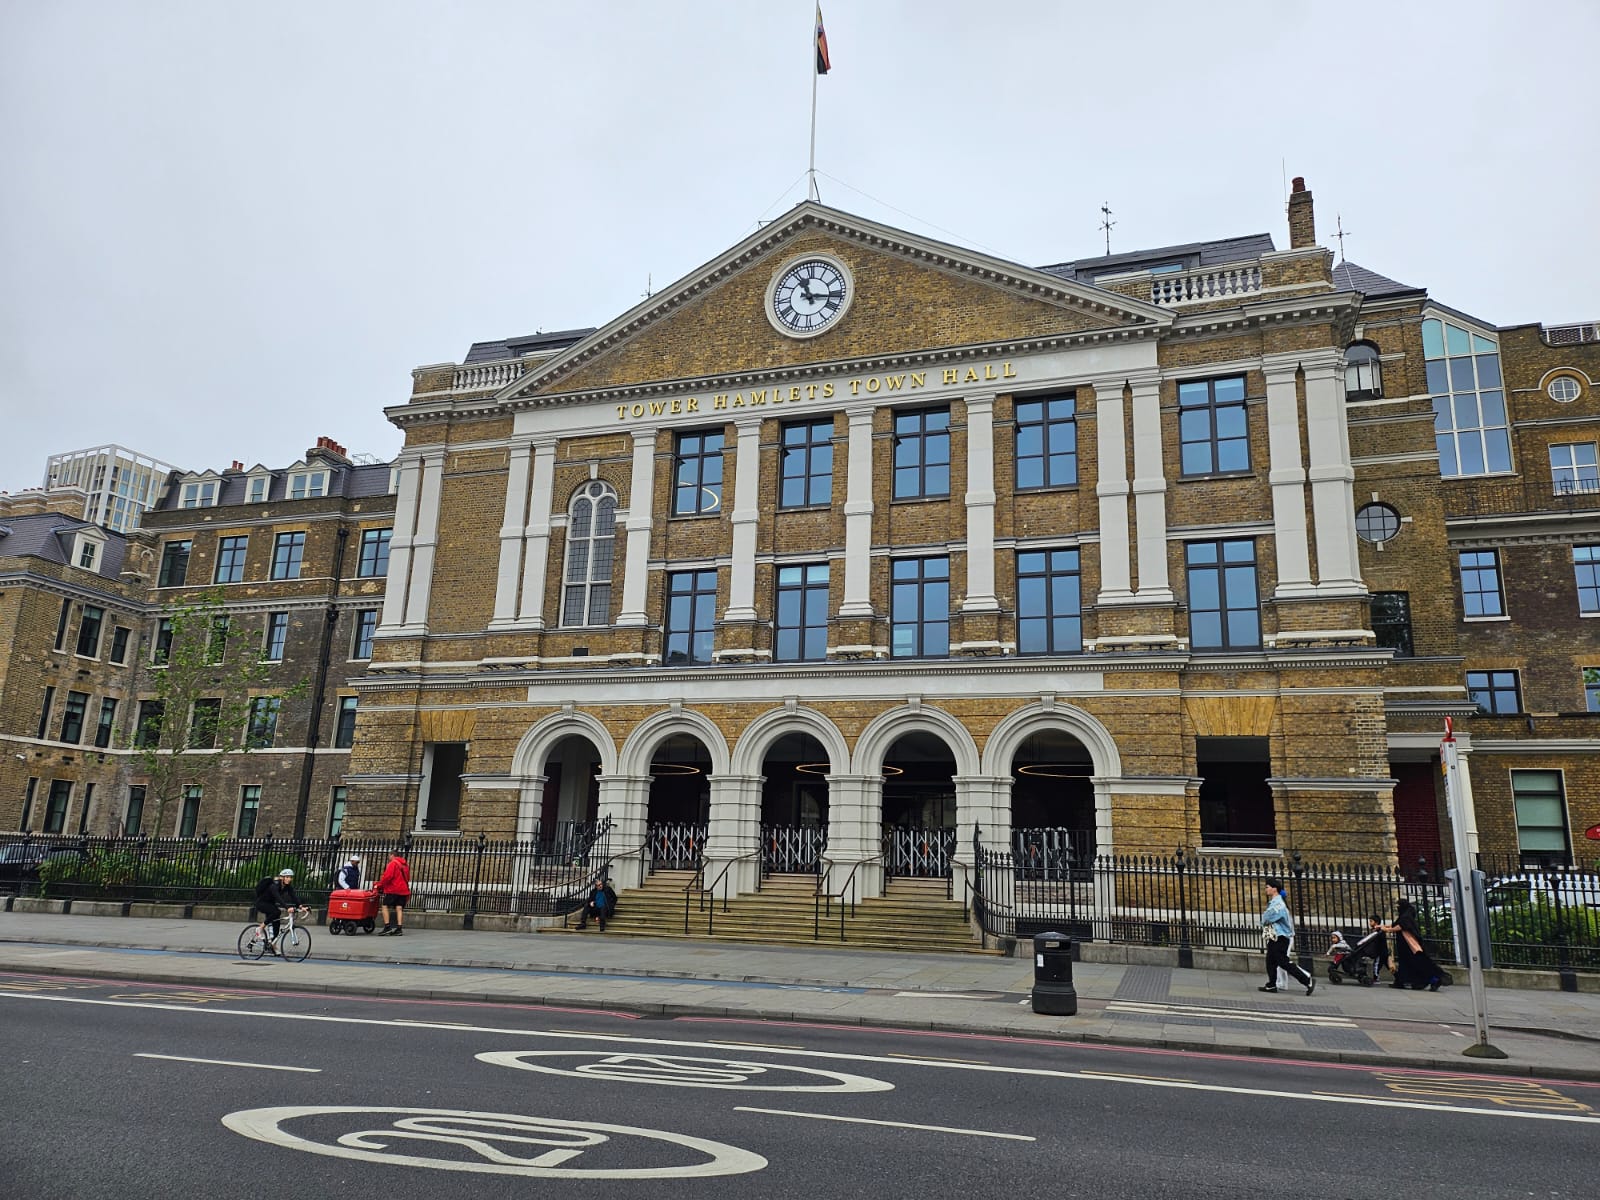 A large, light coloured brick building with an arched portico up a flight of steps. Above it are two floors of tall windows, topped with a pediment. There's a clock in the centre of the pediment and a flag pole on the top. The building used by the London Hospital, but is now Tower Hamlets Town Hall and this is written across the front of the building.